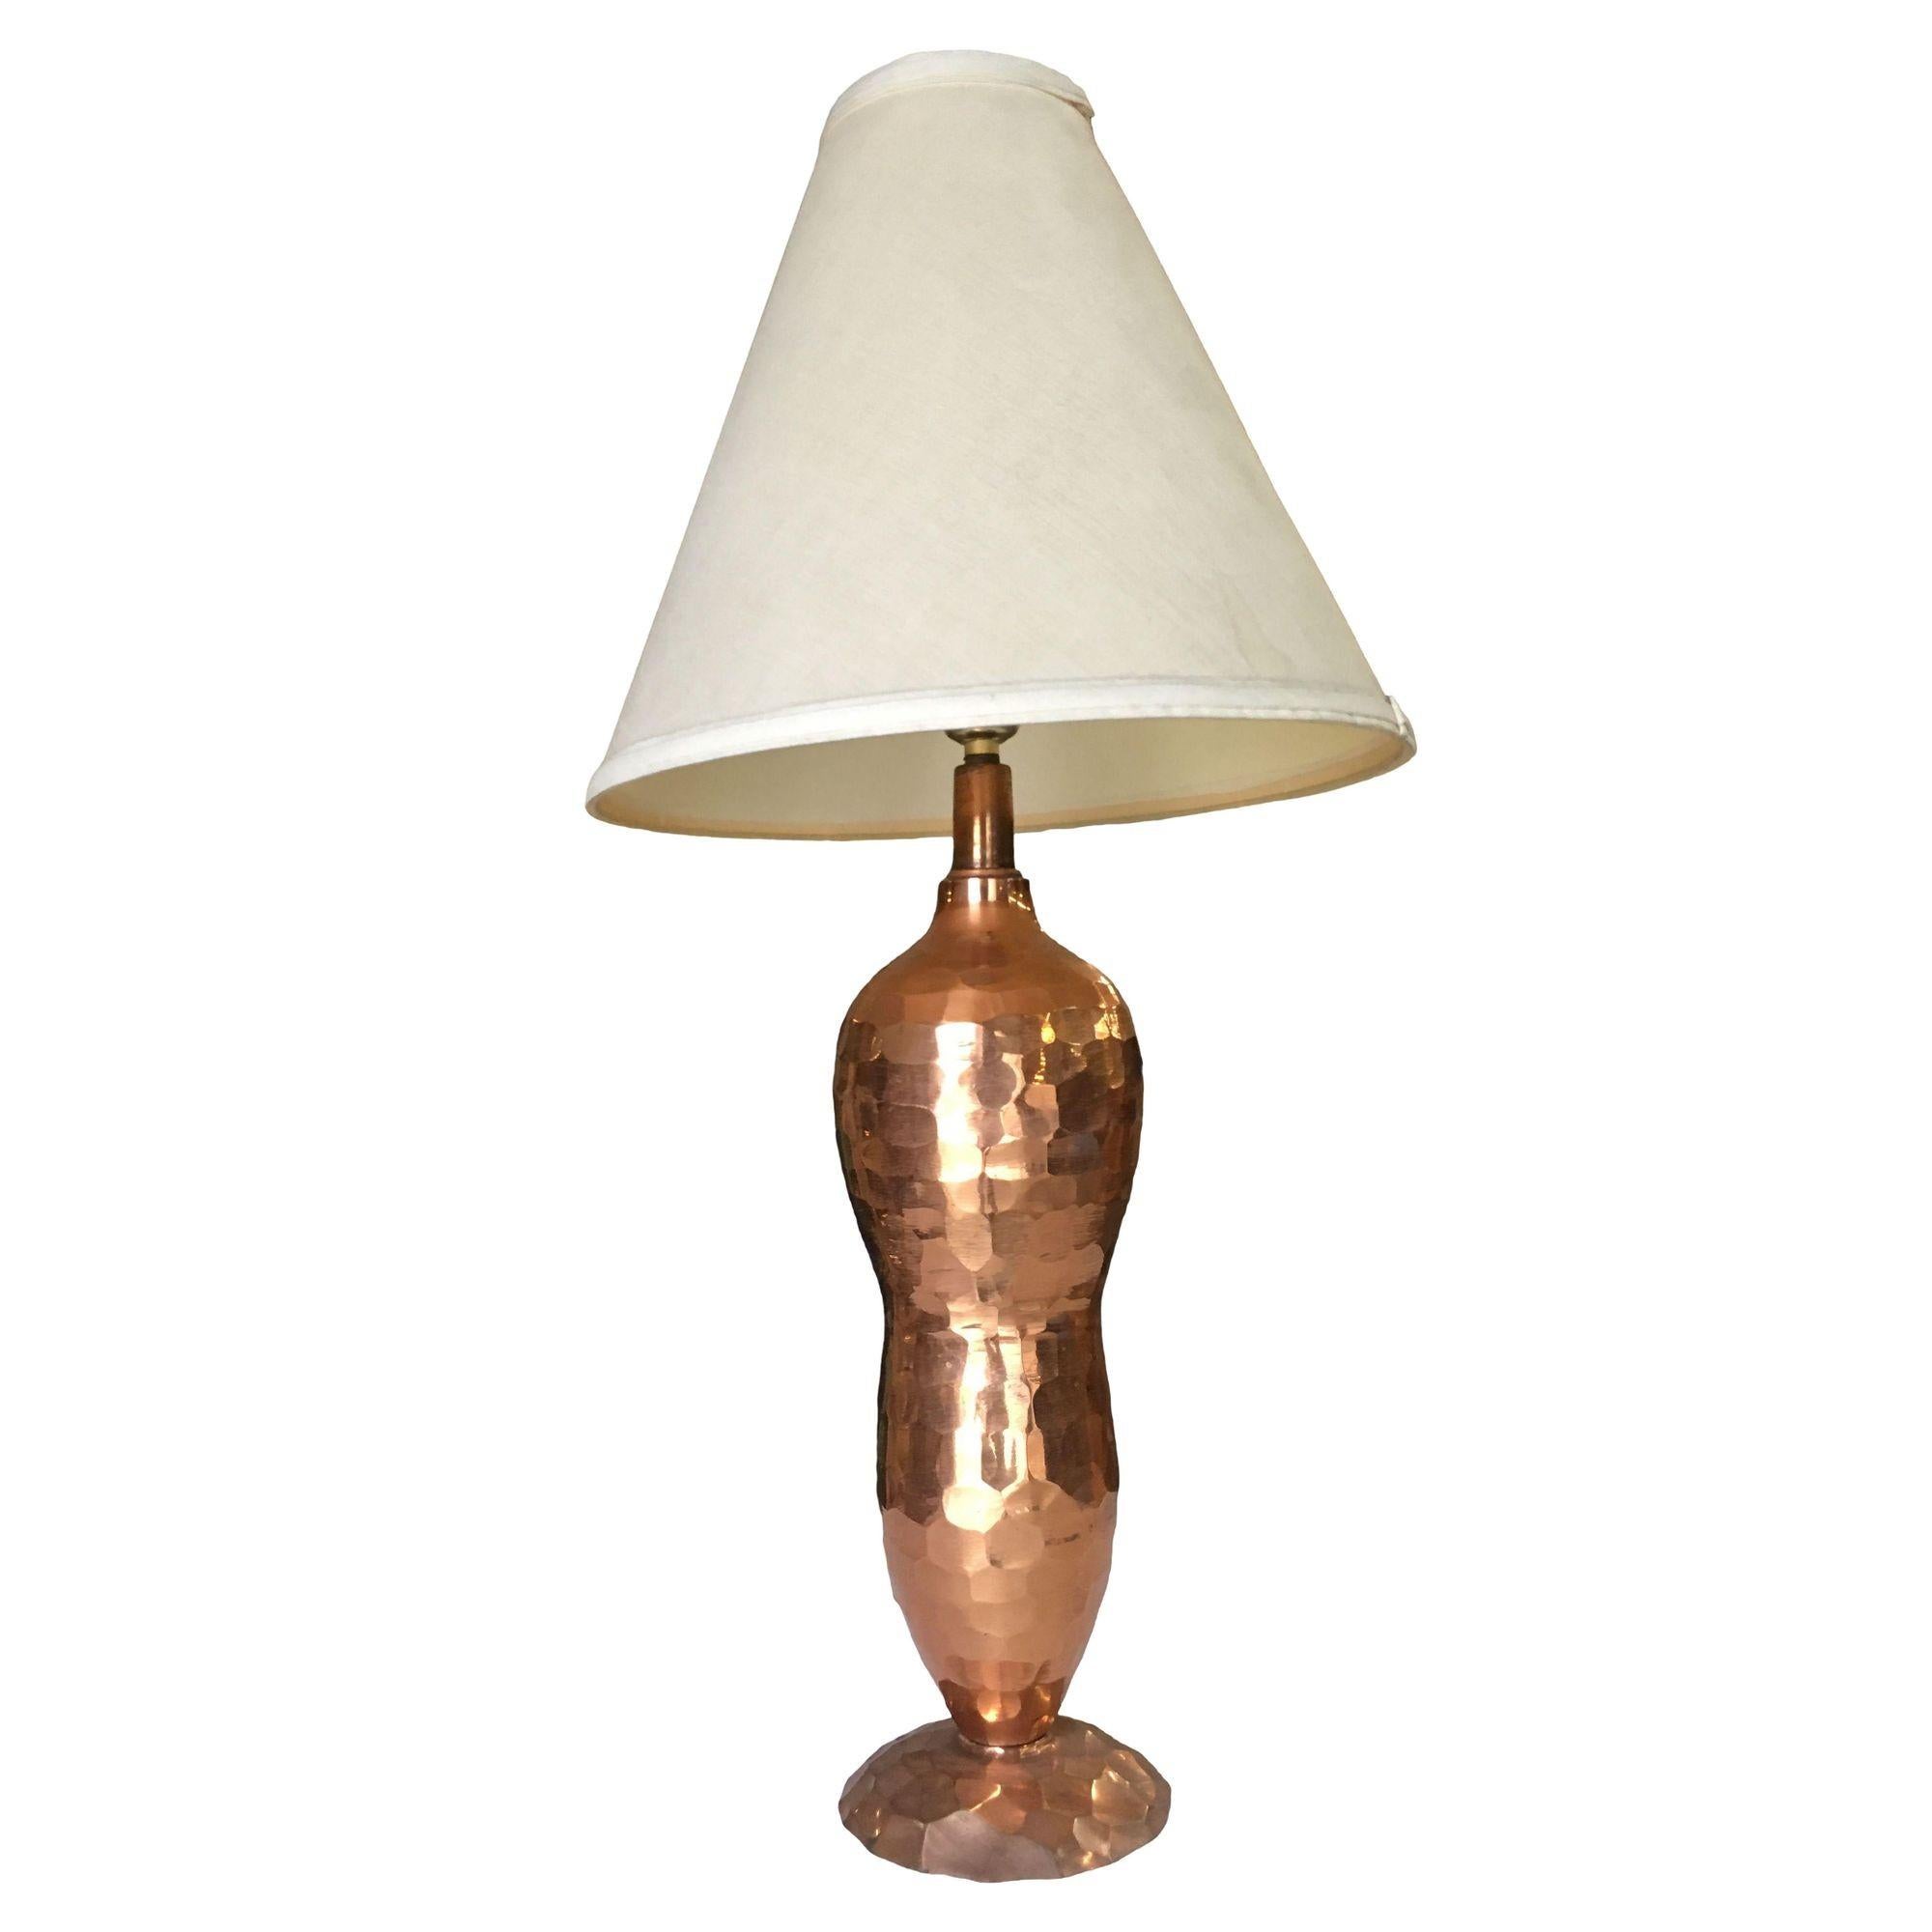 Mission Inspired Hand Hammered Copper Lamp pair. The set features two lamps, hand-hammered copper, bottle-shaped lamps with a single light on top.

--Lamp Shades not included--

Dimensions: Height: 19.5 in, Diameter: 5 in

United States, 1970